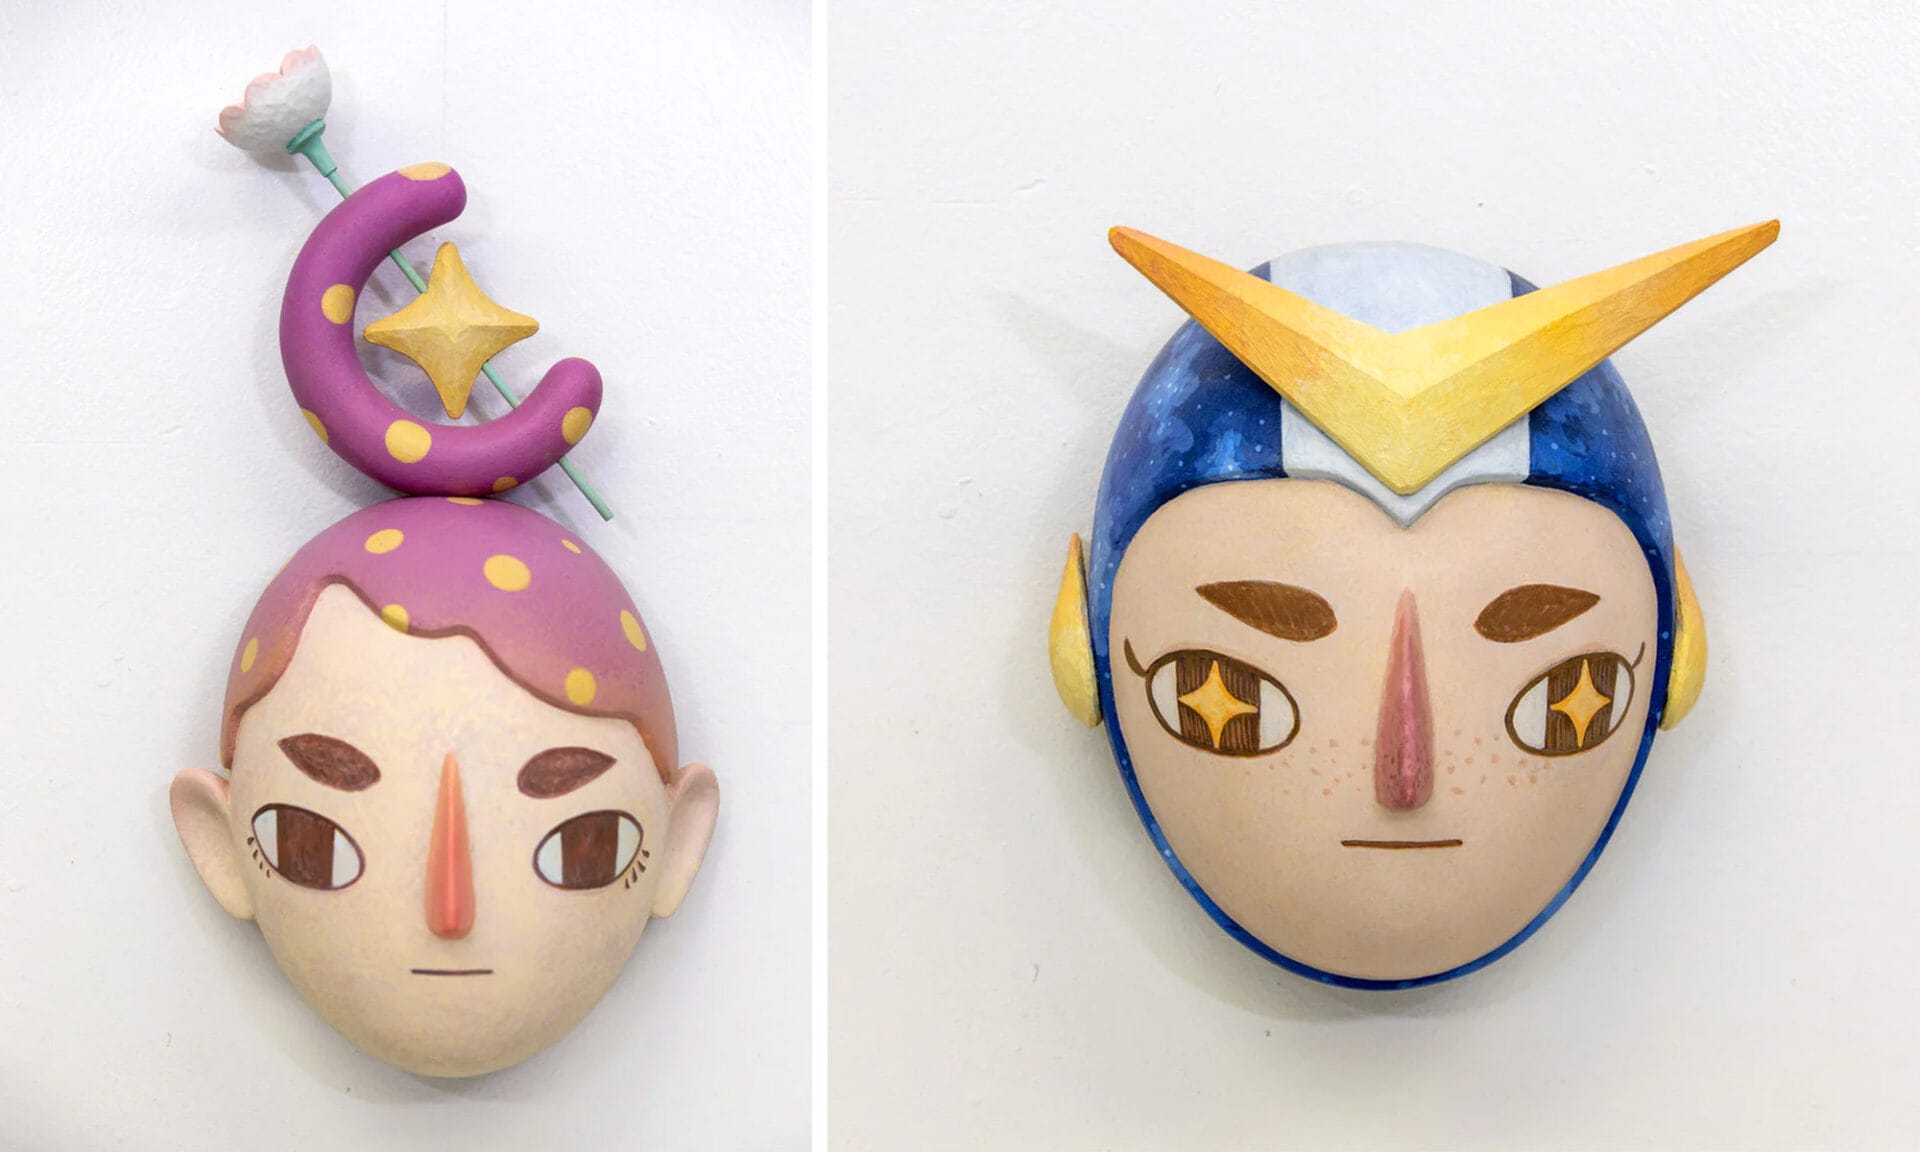 Left: a sculpture of a head with purple hair shaped into a crescent moon. Right: a sculpture of a head with a yellow V on its headwear.